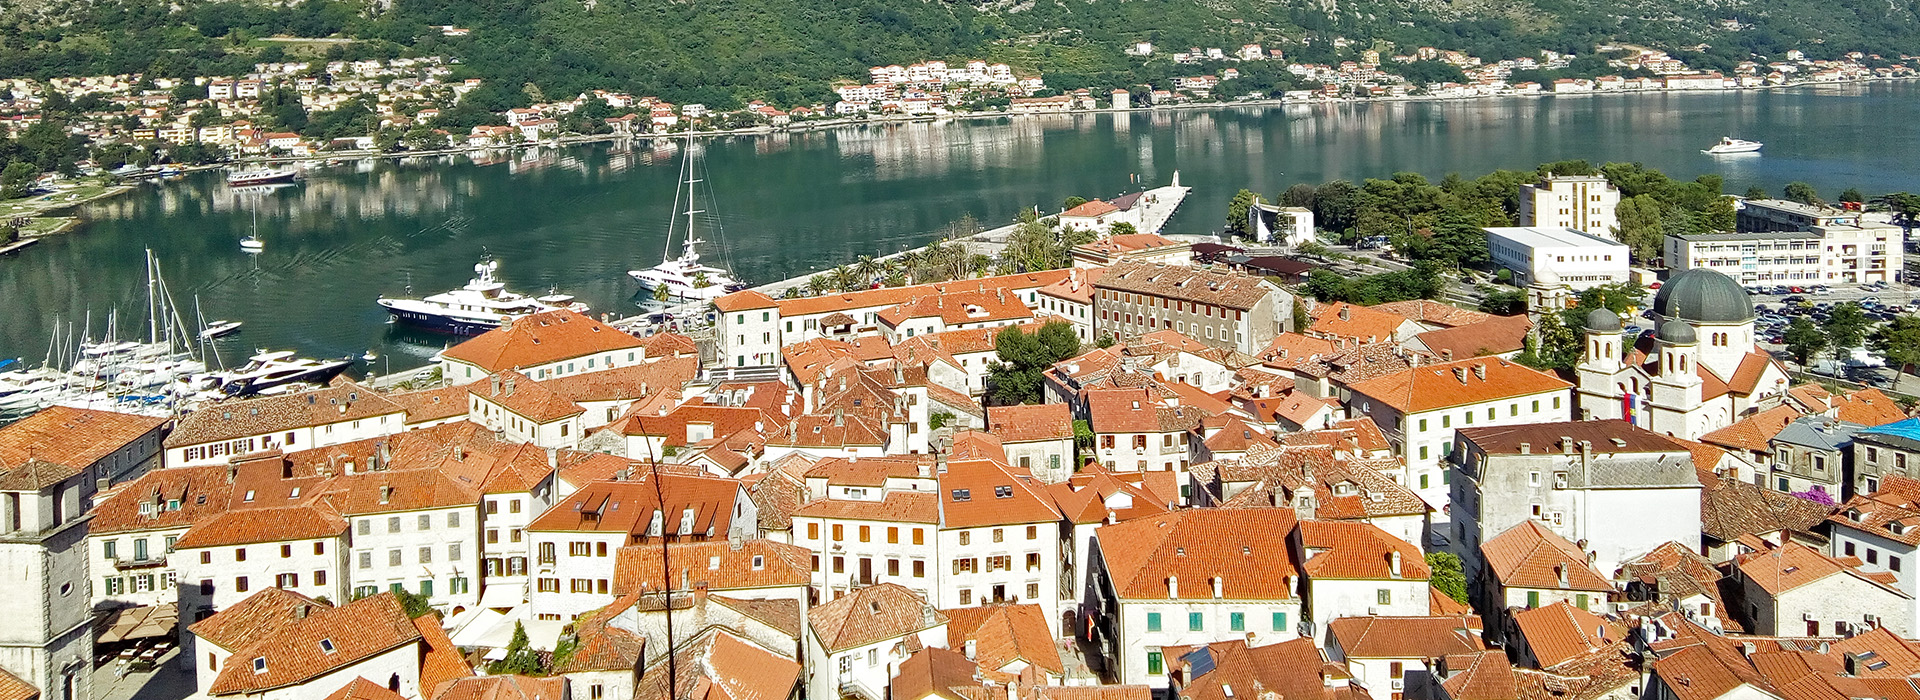 The Peaks of the Balkans walking guided holiday - Kotor old town